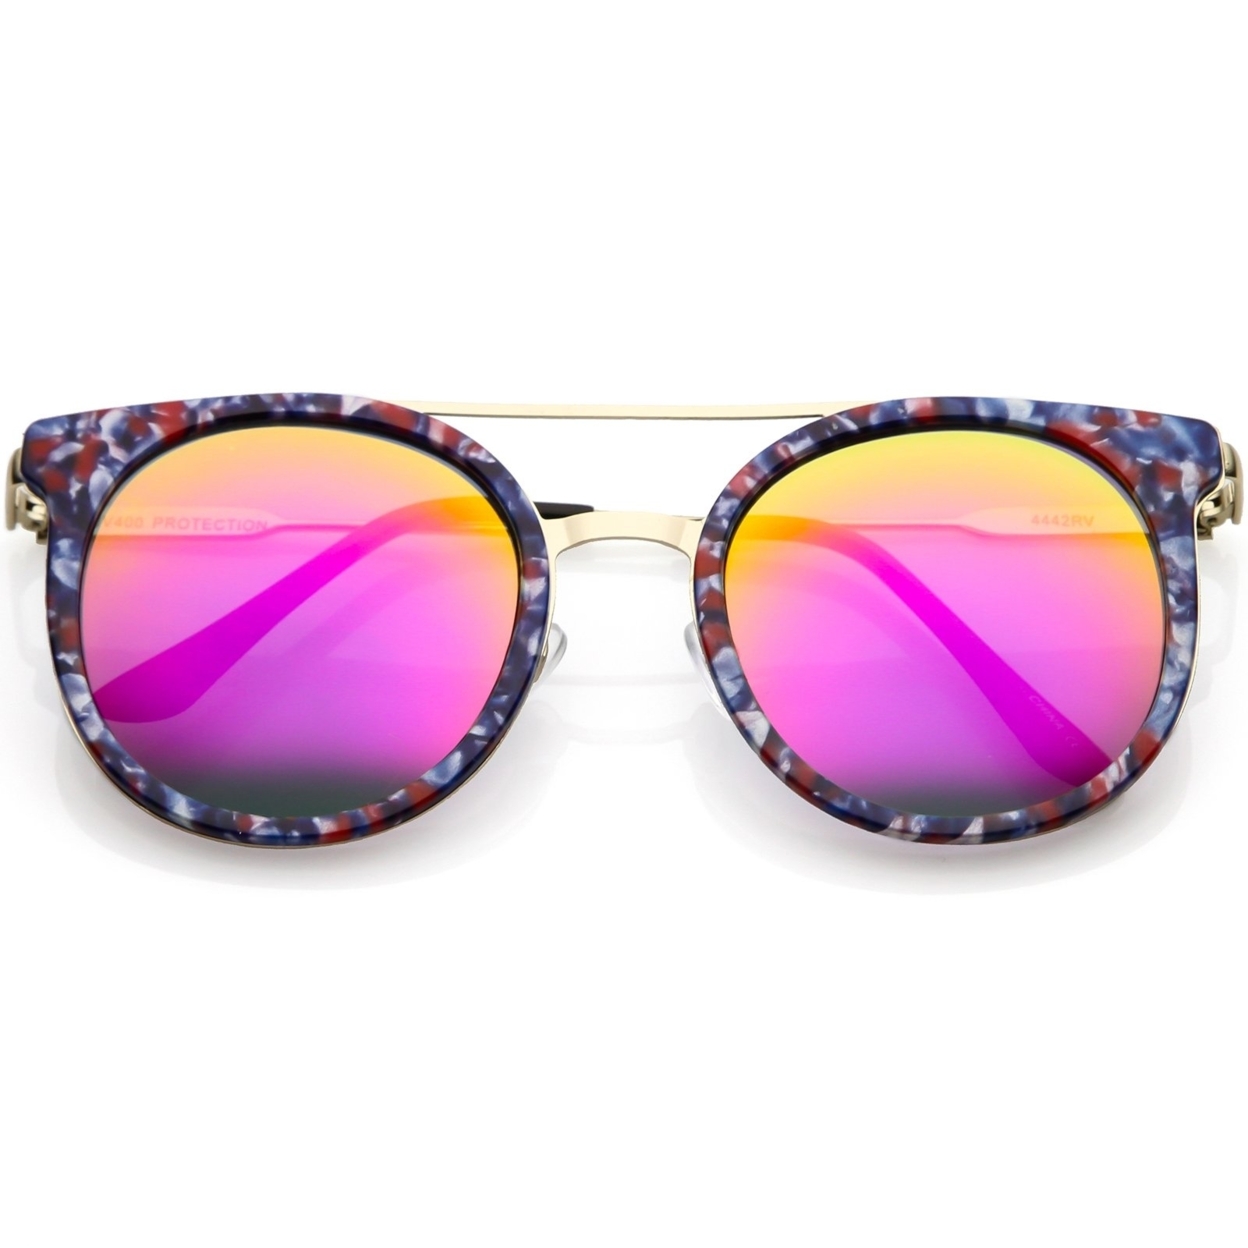 Modern Horn Rimmed Sunglasses Sleek Double Nose Bridge Round Color Mirrored Lens 51mm - Blue Red Silver / Magenta Mirror